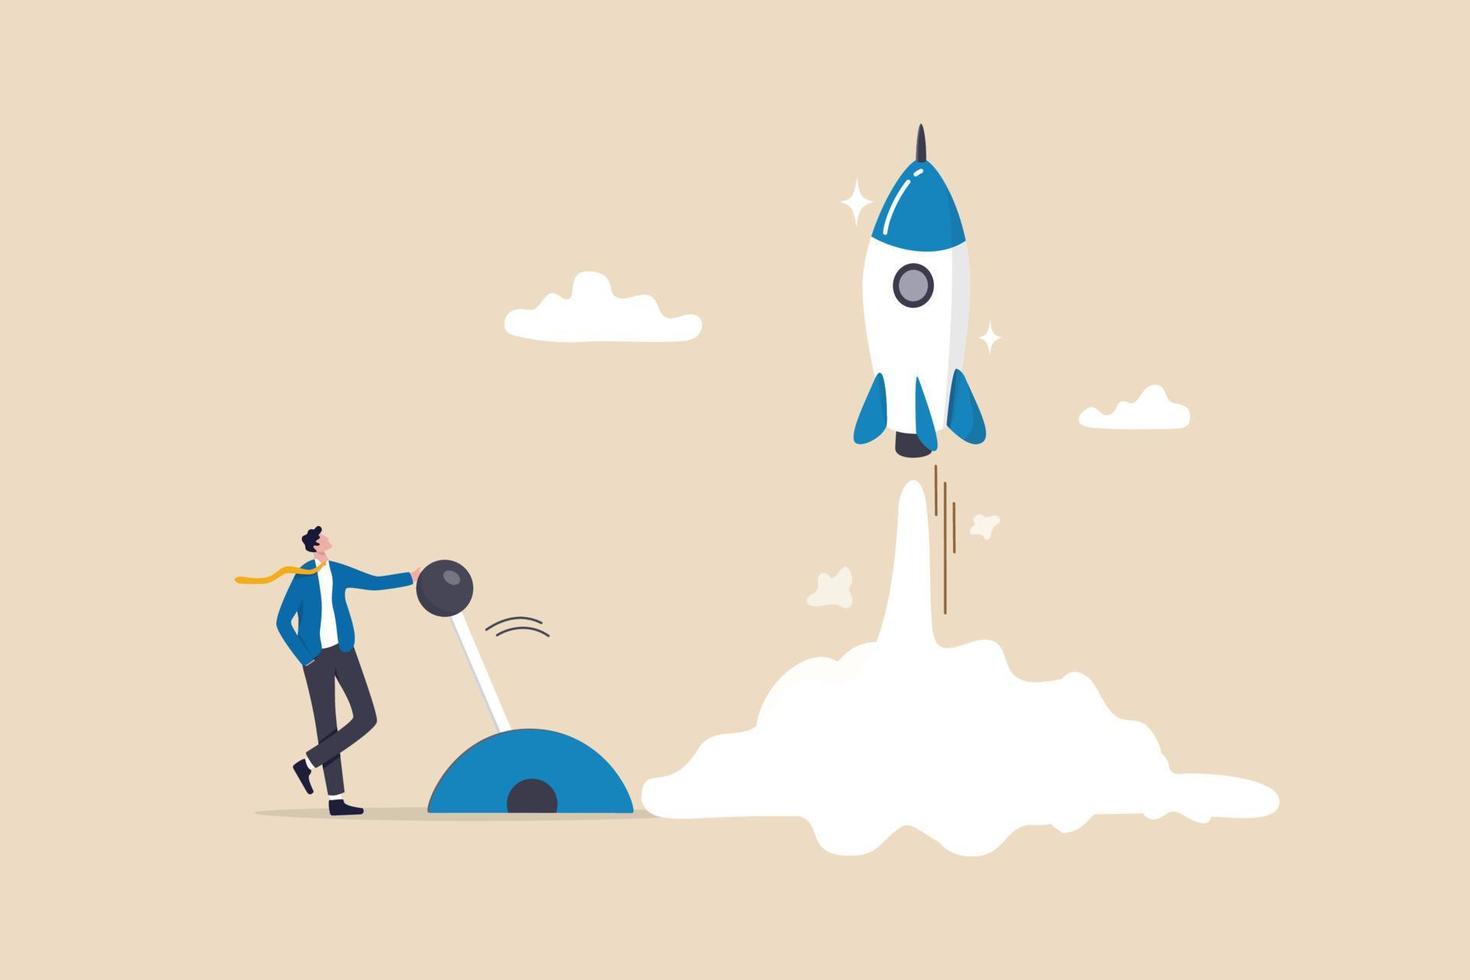 Start your own business, launch success rocket or entrepreneur, startup project or boost company growth, invention concept, ambitious businessman entrepreneur push switch to launch rocket into sky. vector